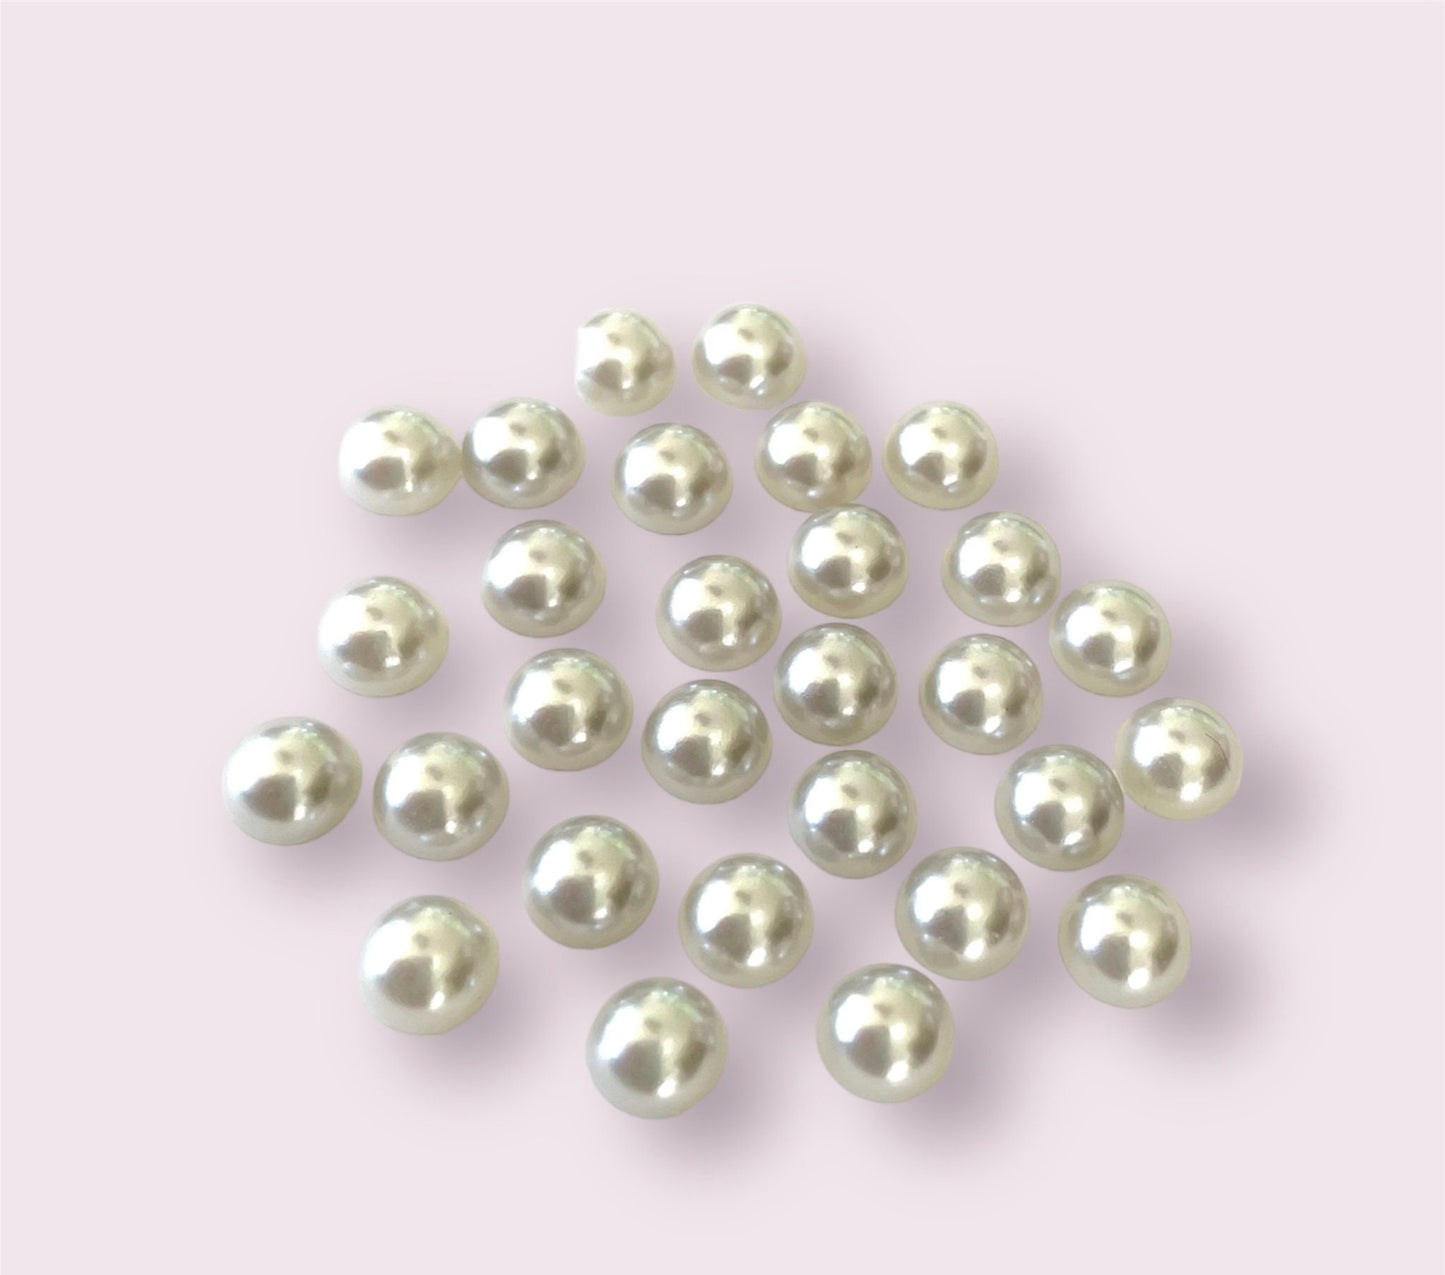 Pale silver half round cabochons, 8mm